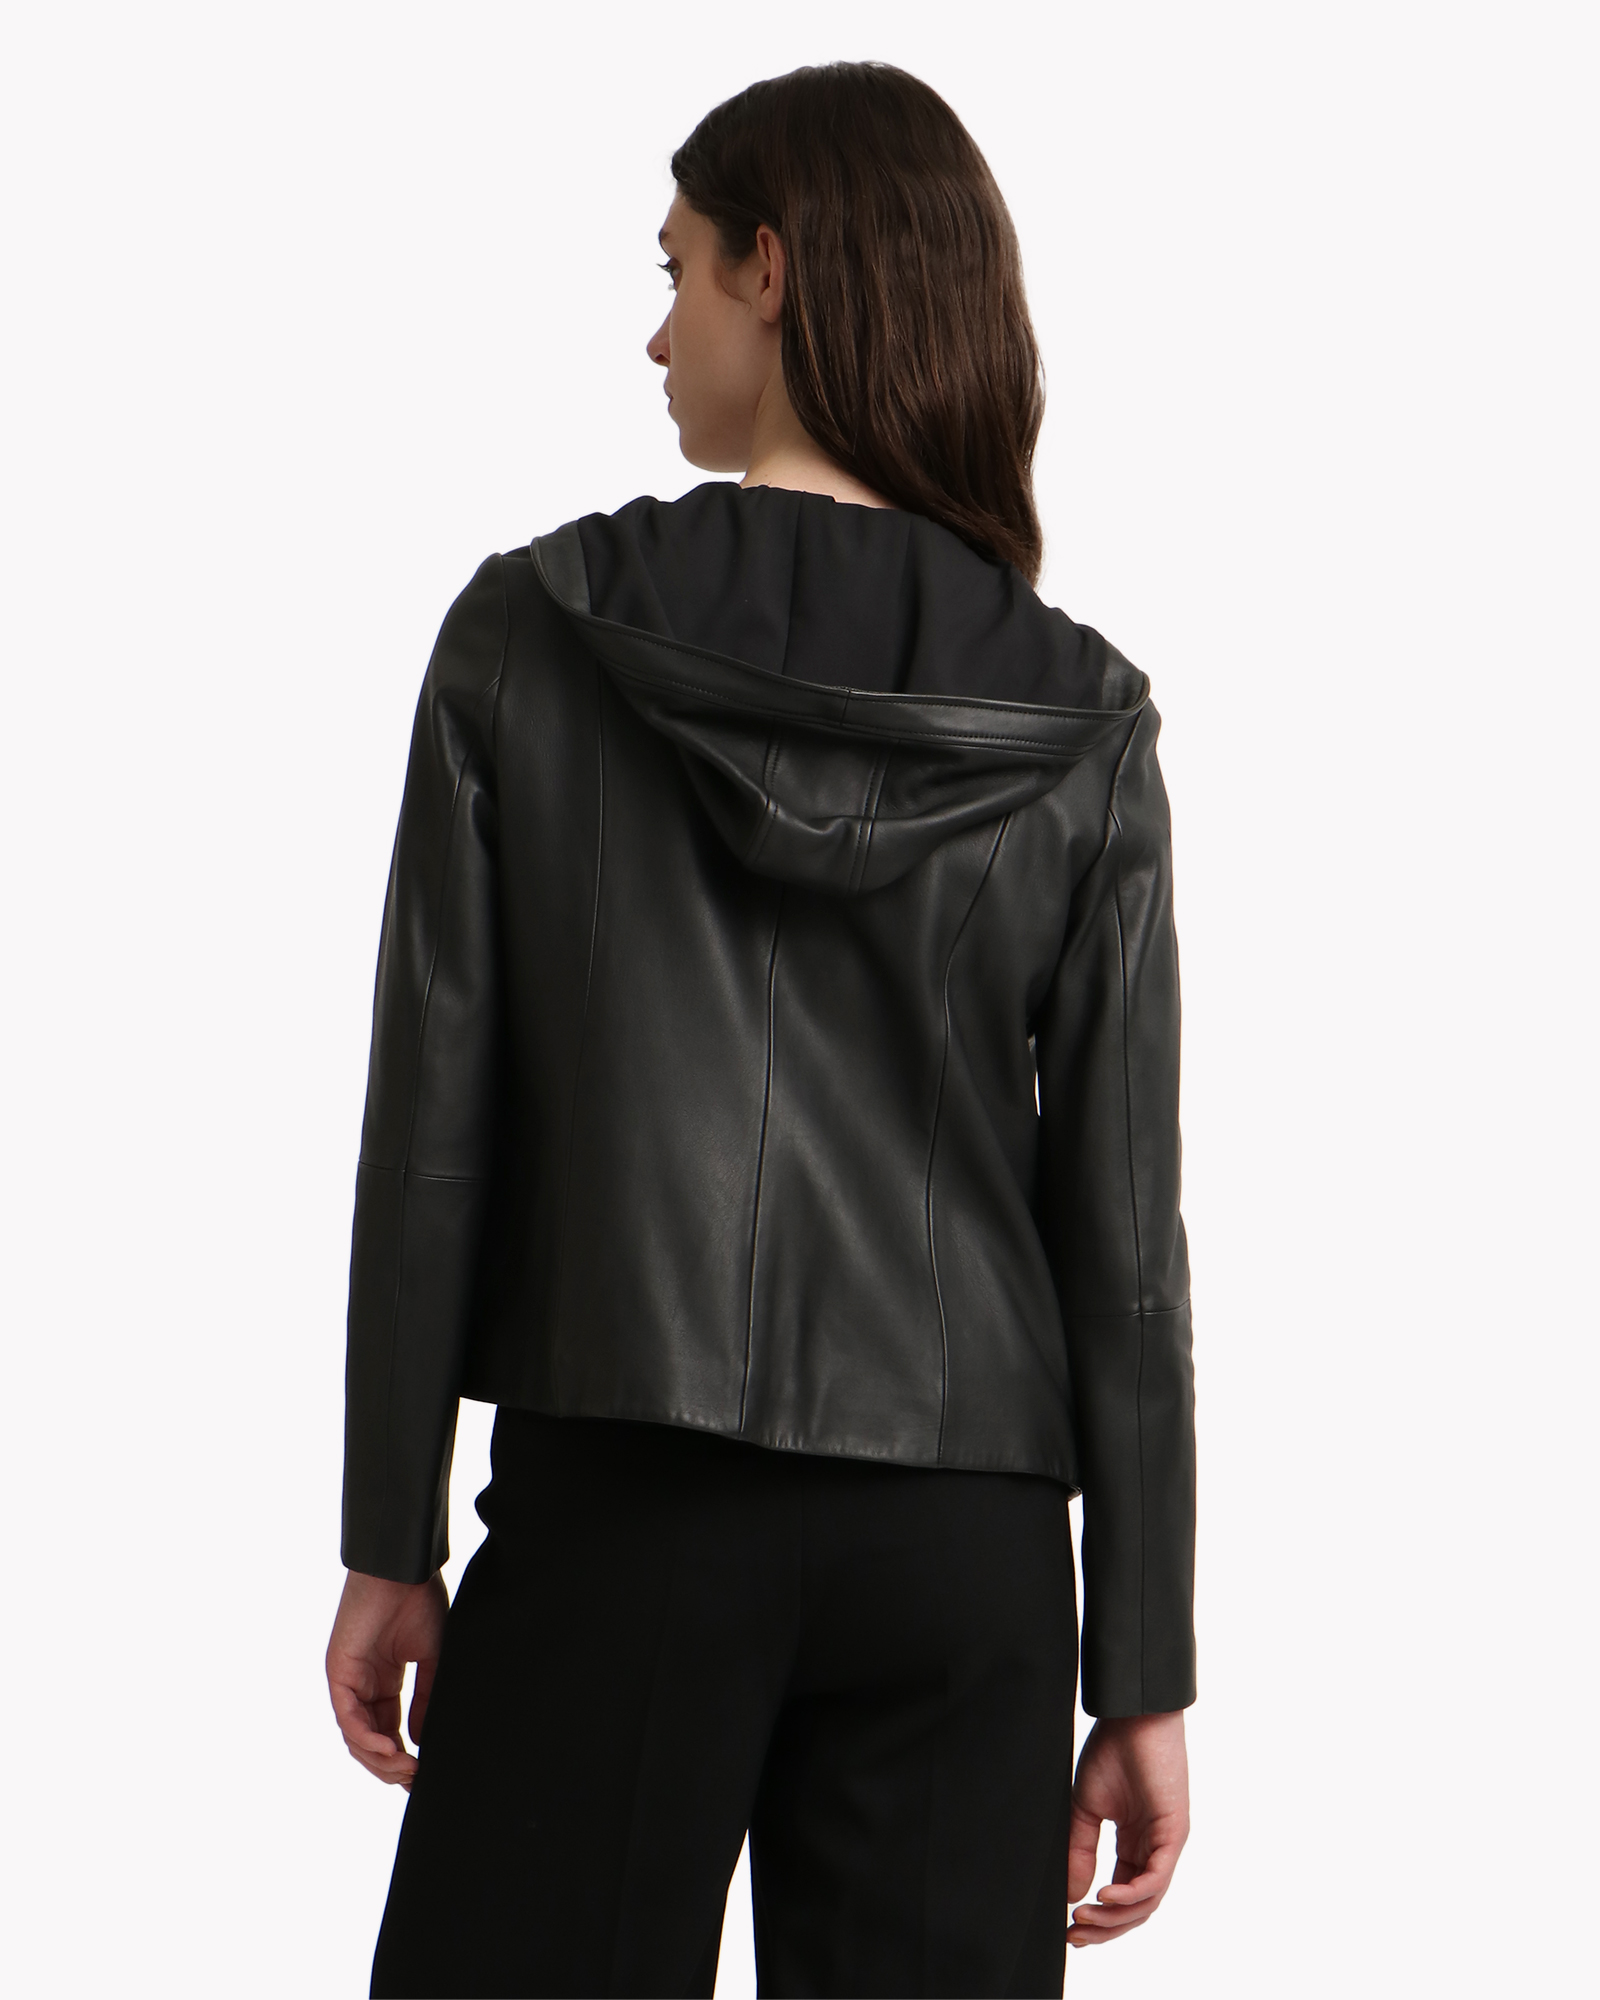 Soft Leather Zip Up JKT | WOMEN（レディース）｜Theory 公式通販サイト